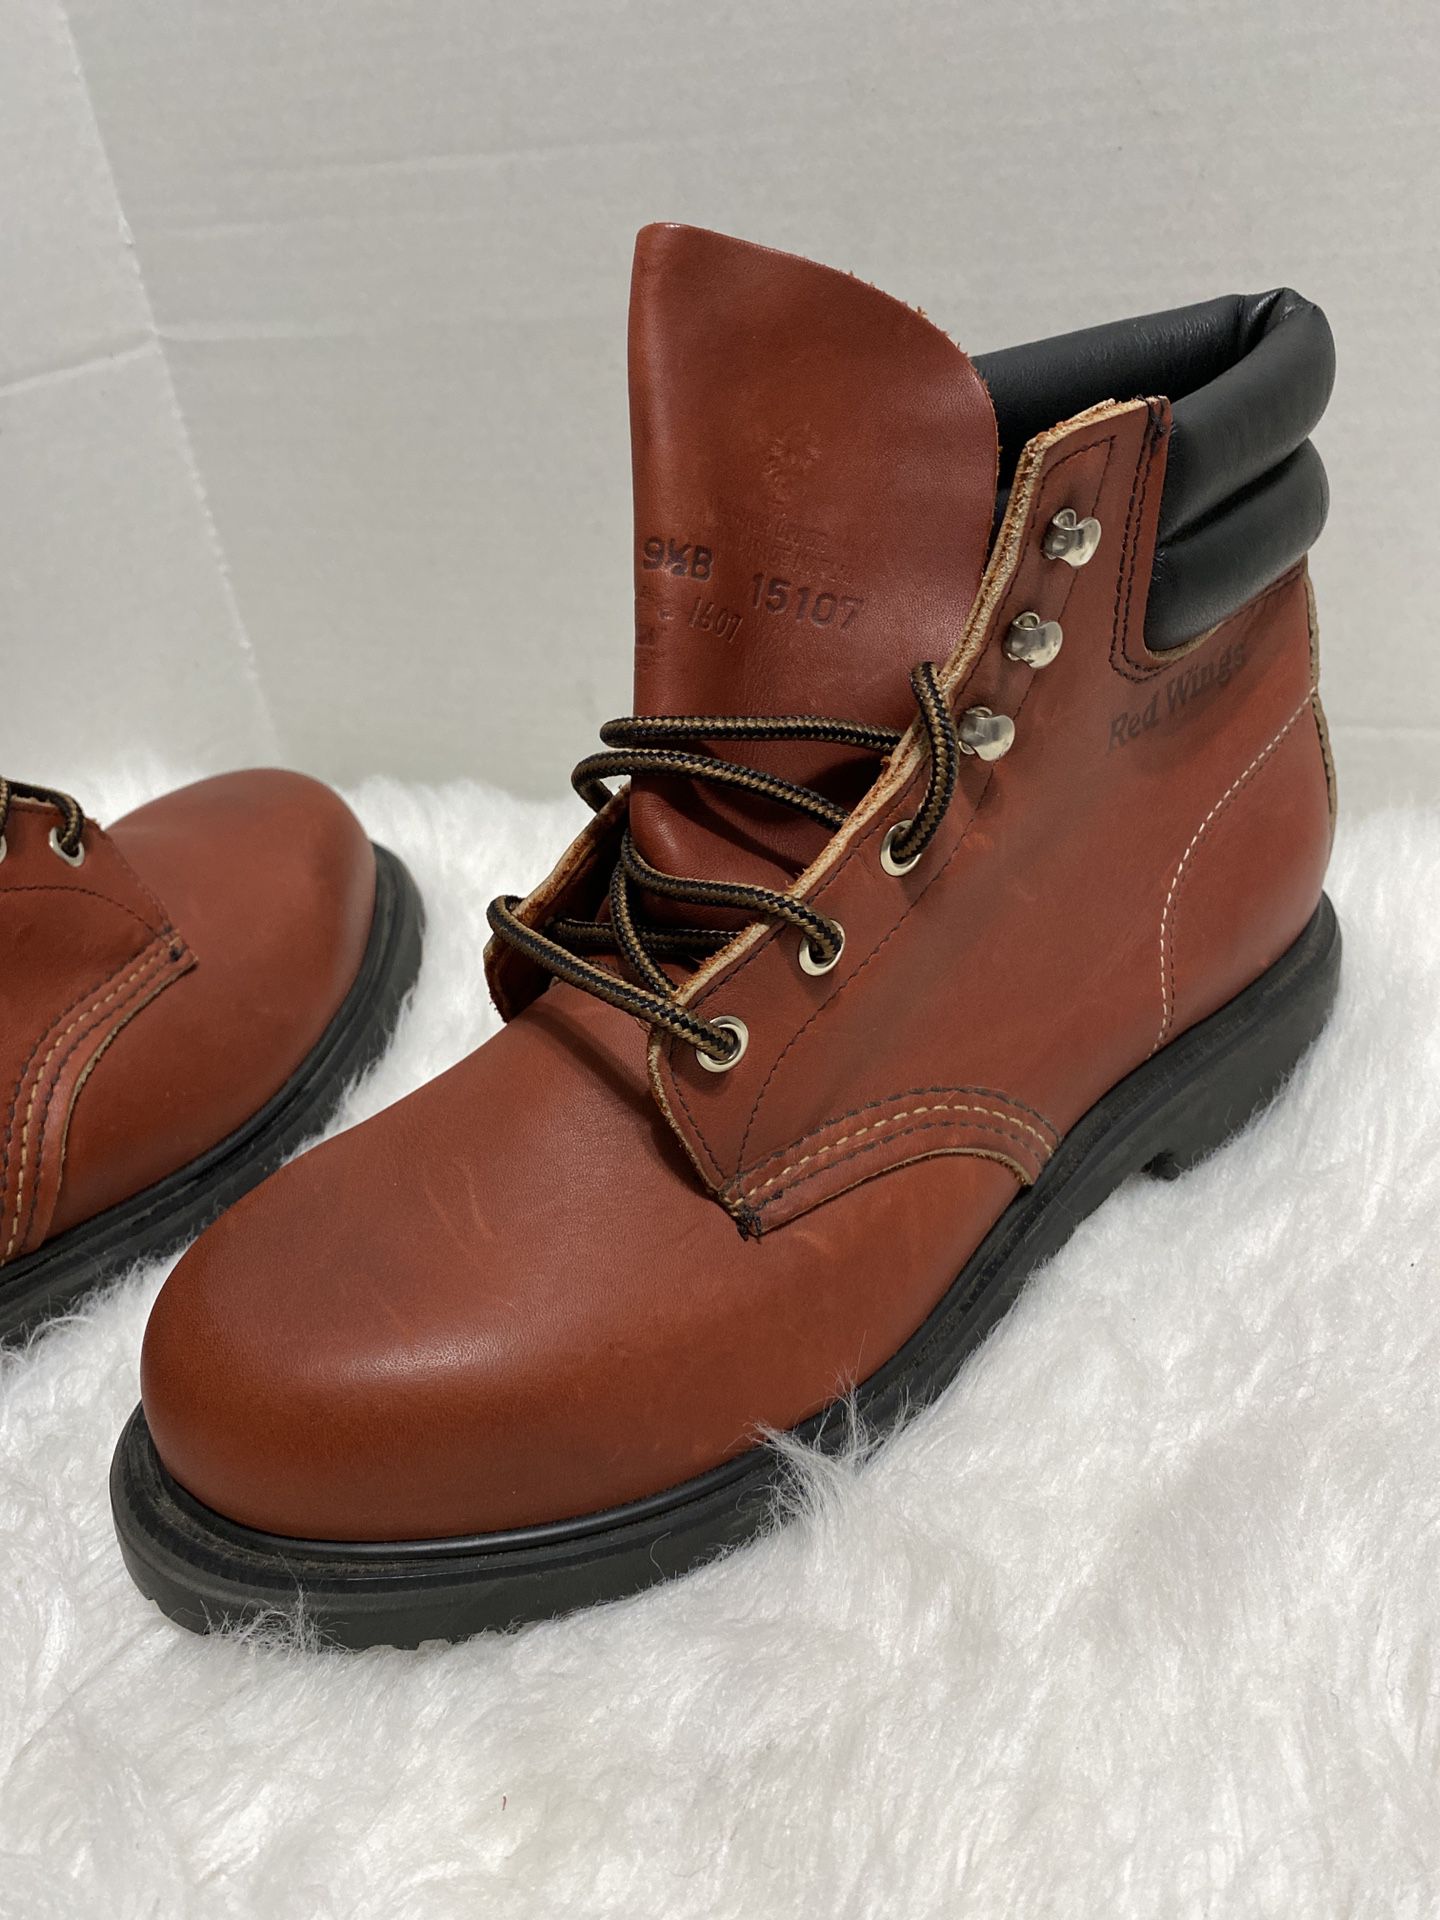 Red Wings Classic Women's Work Combat Leather Boots size 9 1/2 D  1607 Red Brown